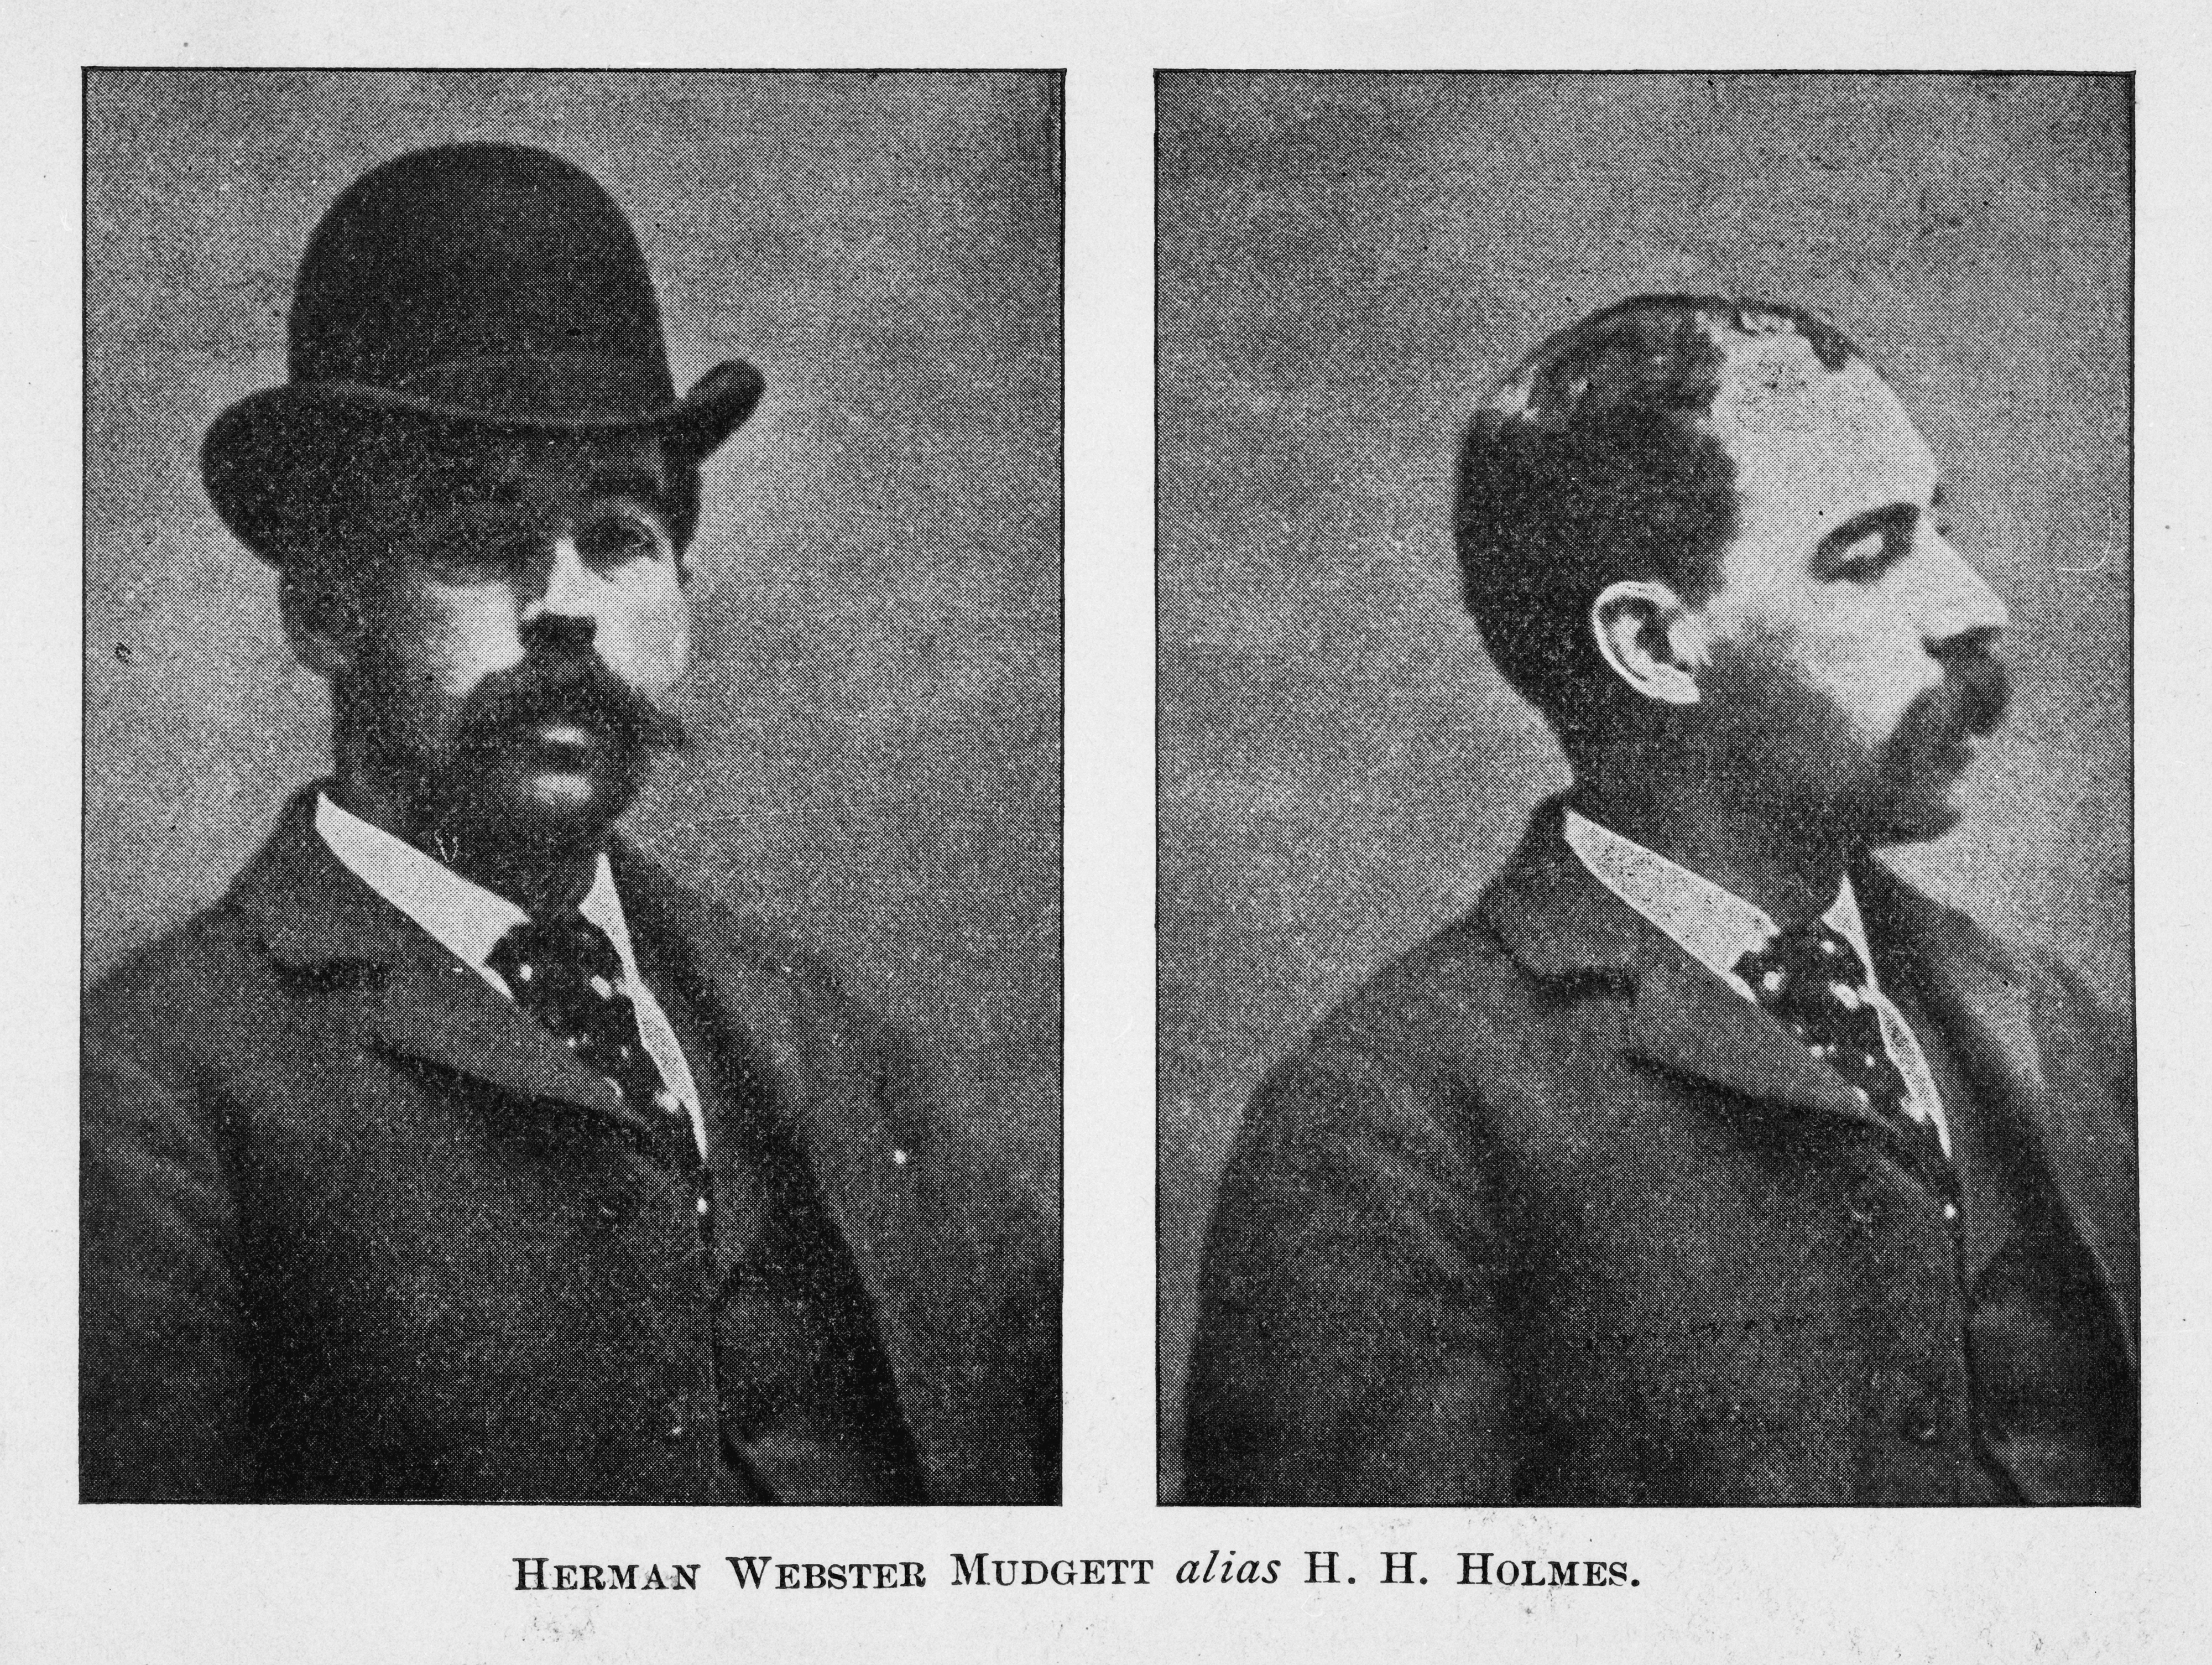 Two portraits (one a profile) of American pharmacist and convicted serial killer Herman Webster Mudgett (better known by his alias H.H. Holmes, 1861 - 1896)